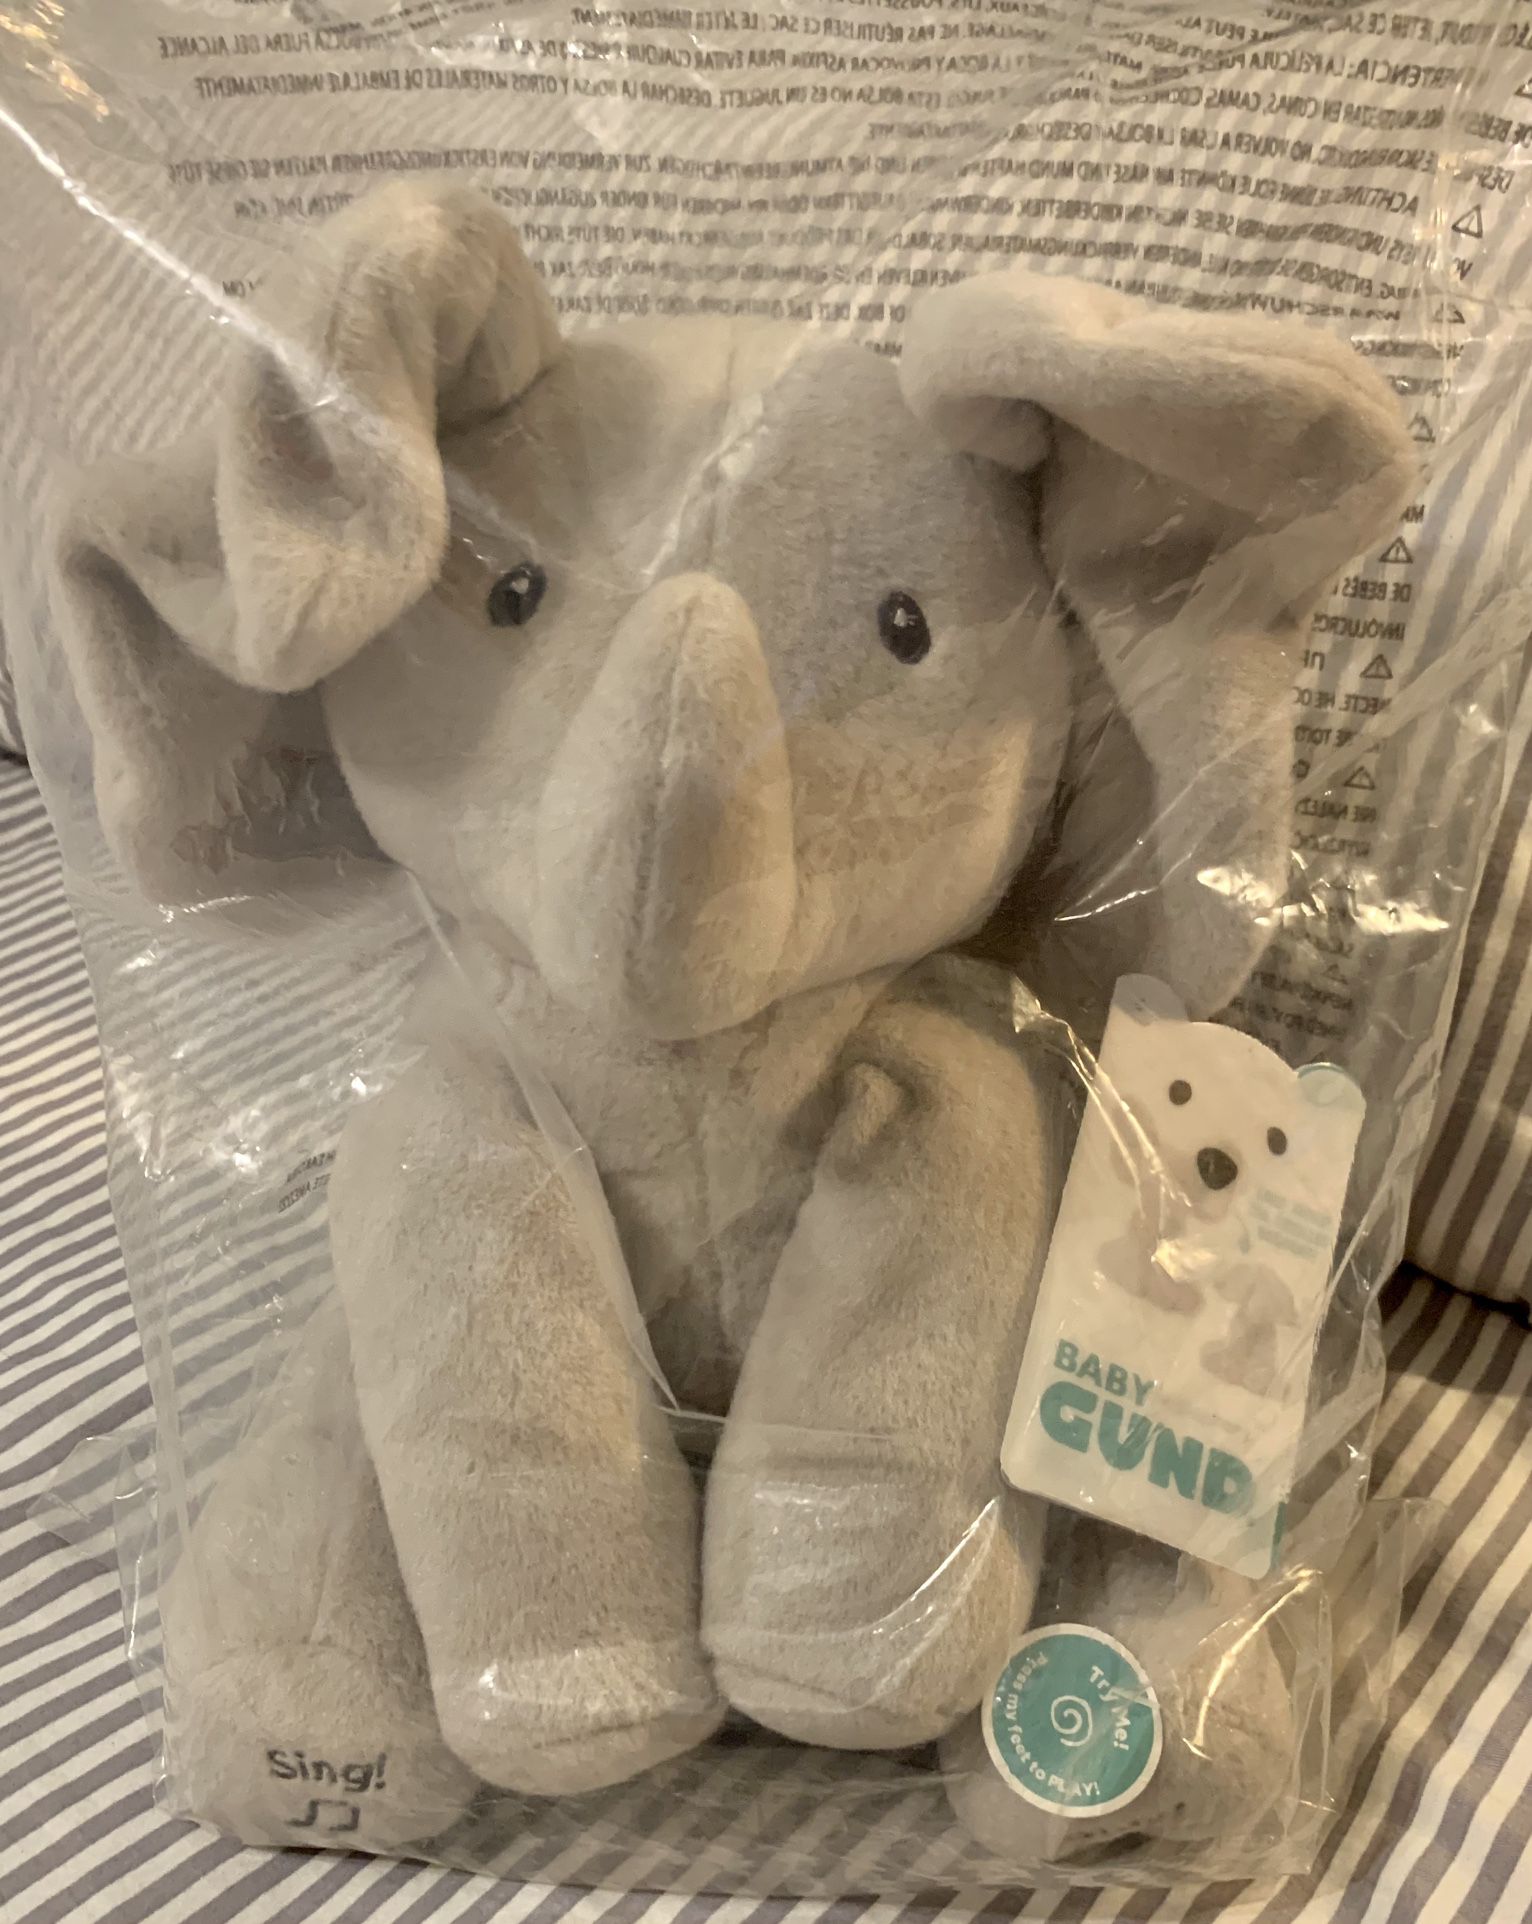 Elephant Toy with Animated Ears - $25